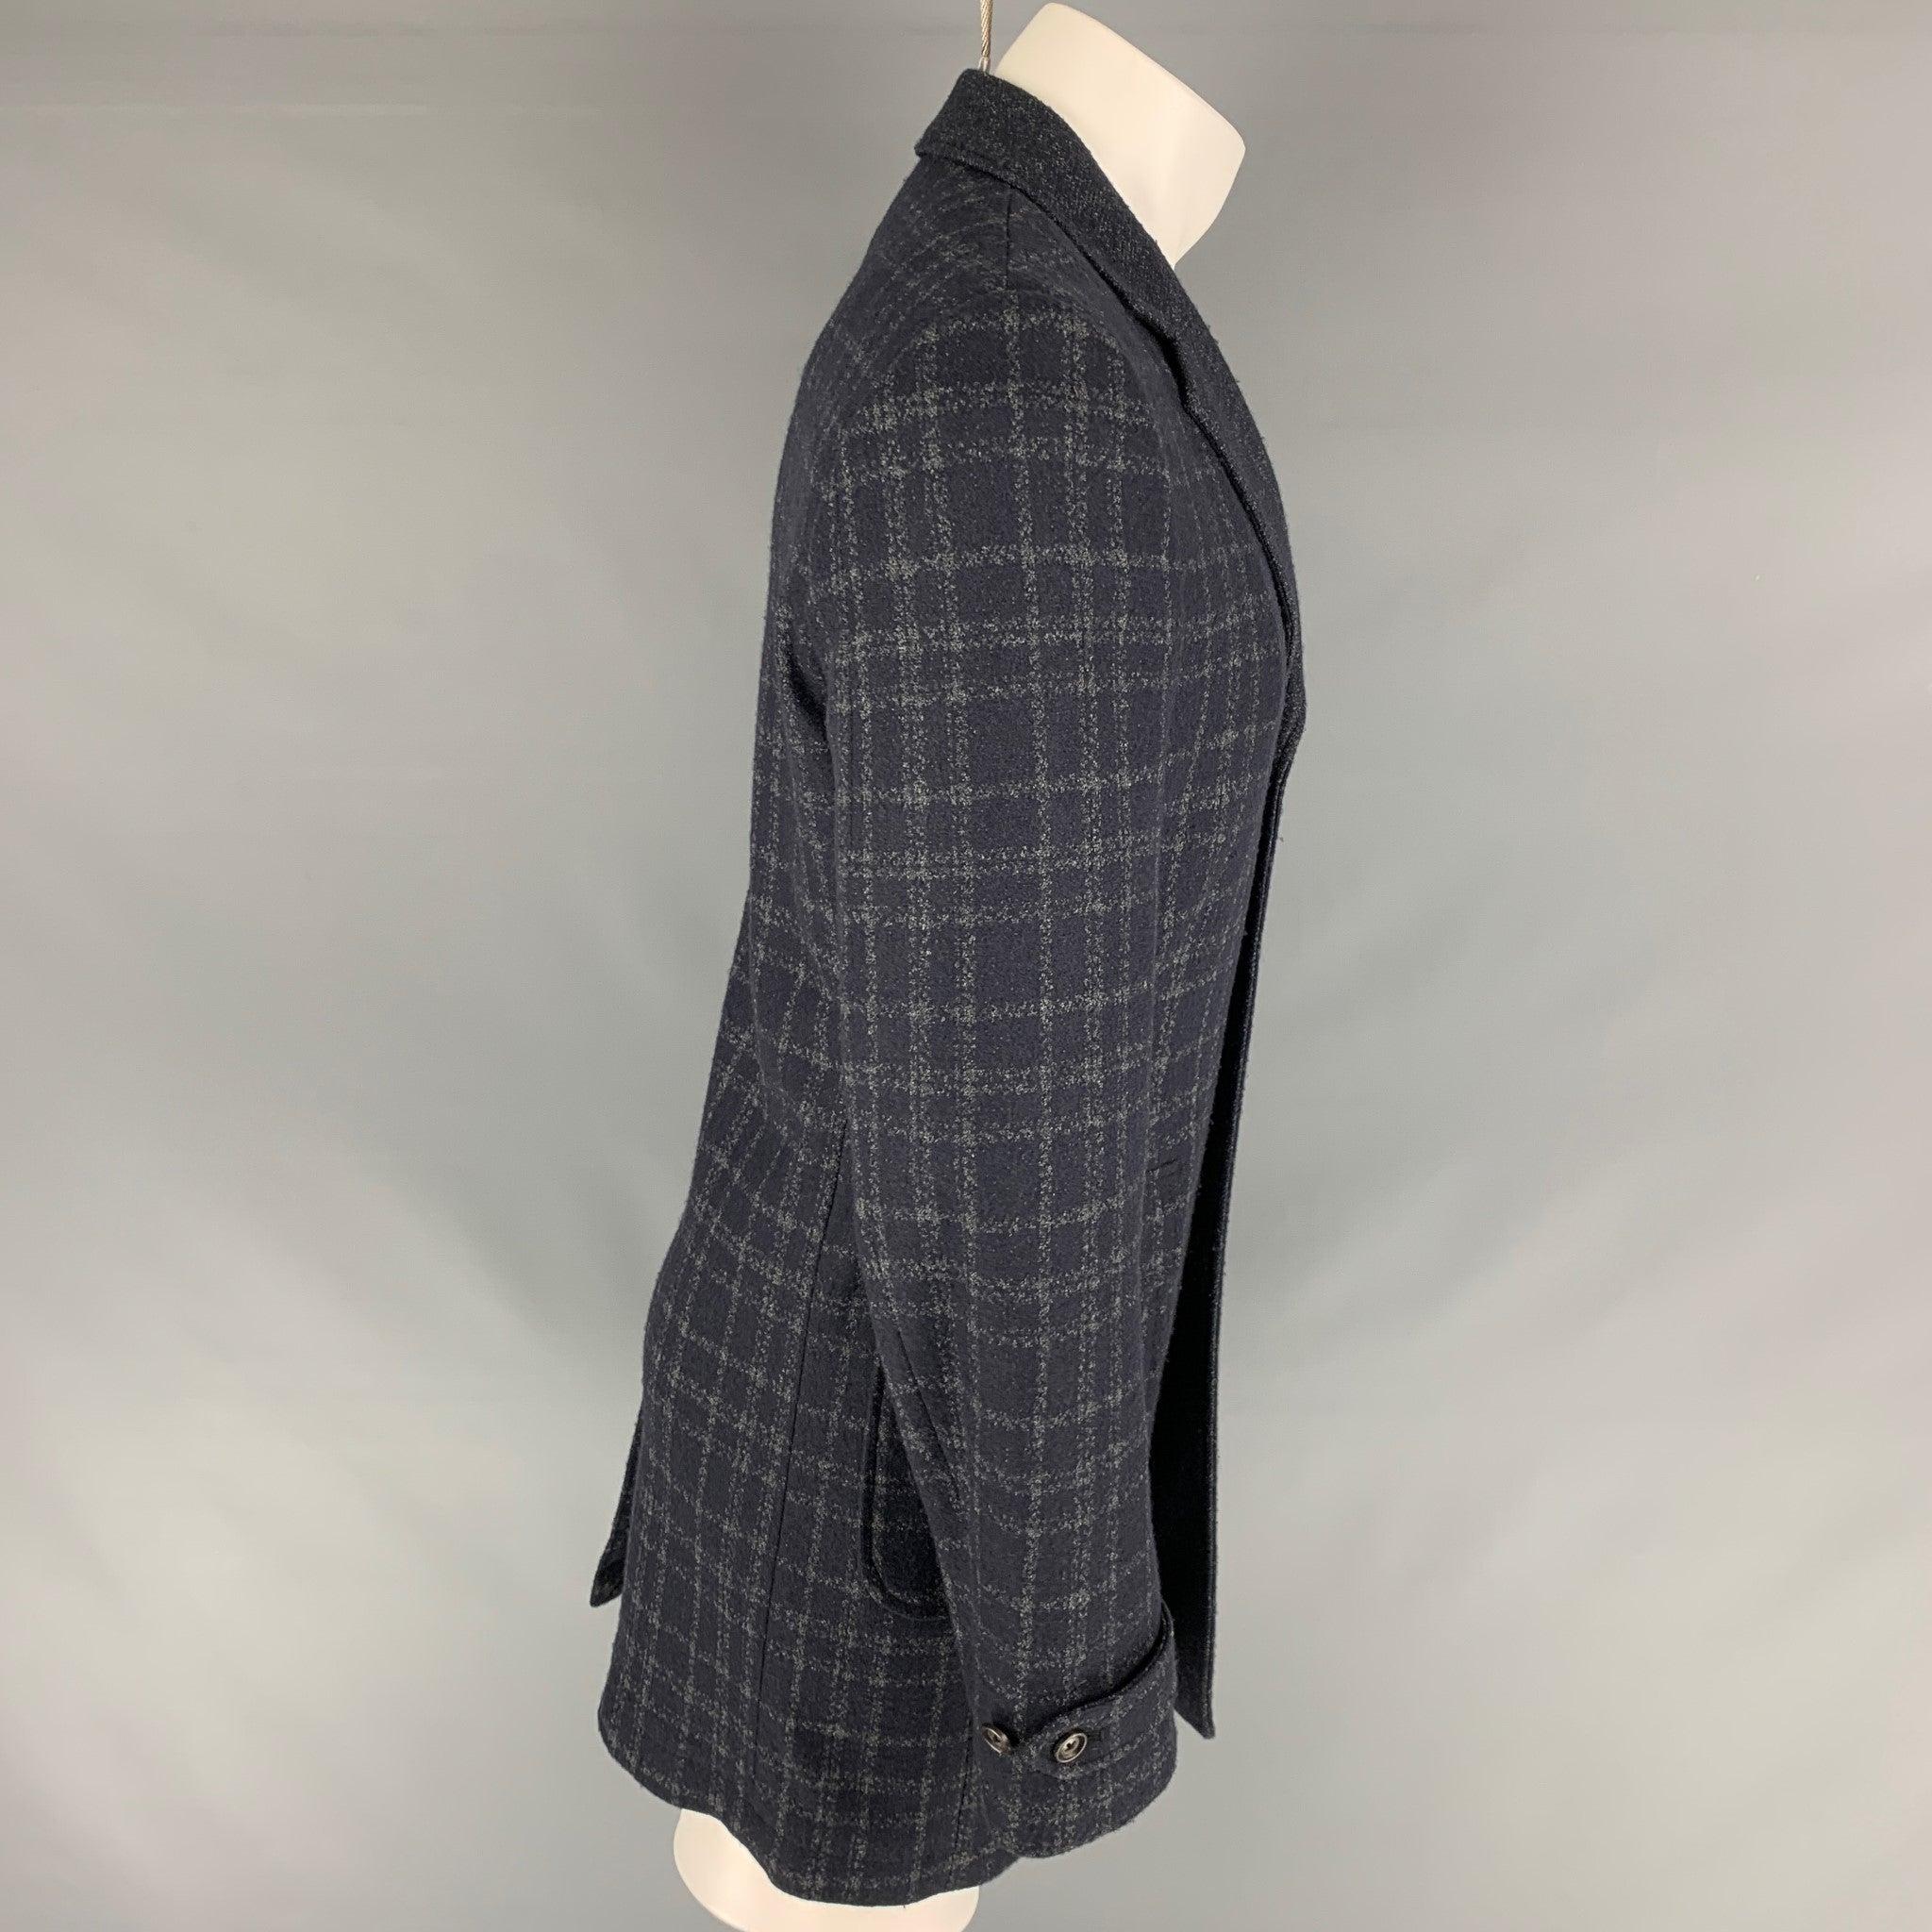 SAKS FIFTH AVENUE Size 40 Navy Grey Plaid Wool Blend Coat In Excellent Condition For Sale In San Francisco, CA